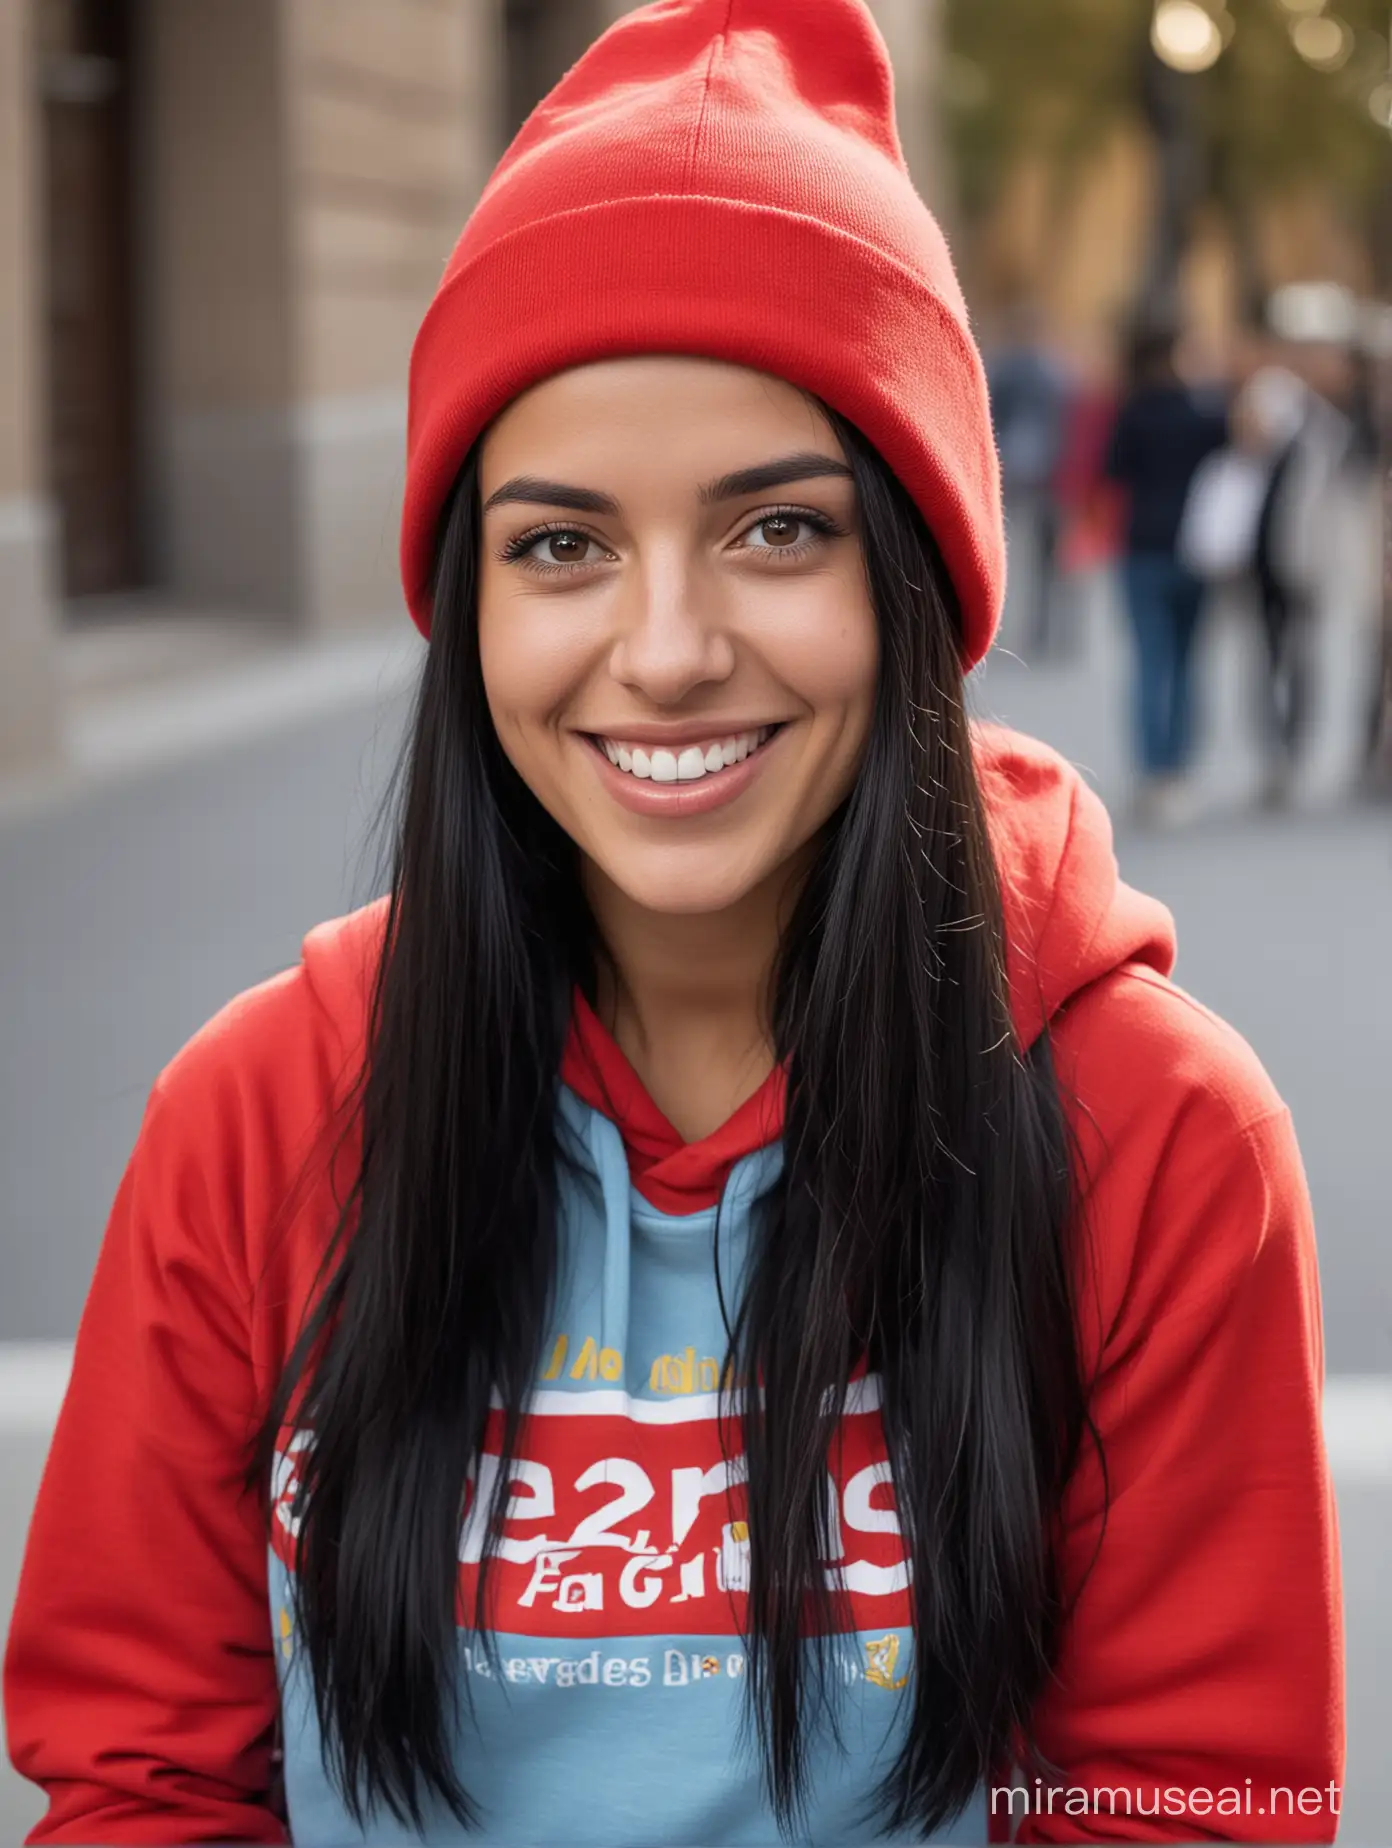 Smiling 26YearOld Spanish Woman with Long Black Hair and Blue Beanie in Madrid